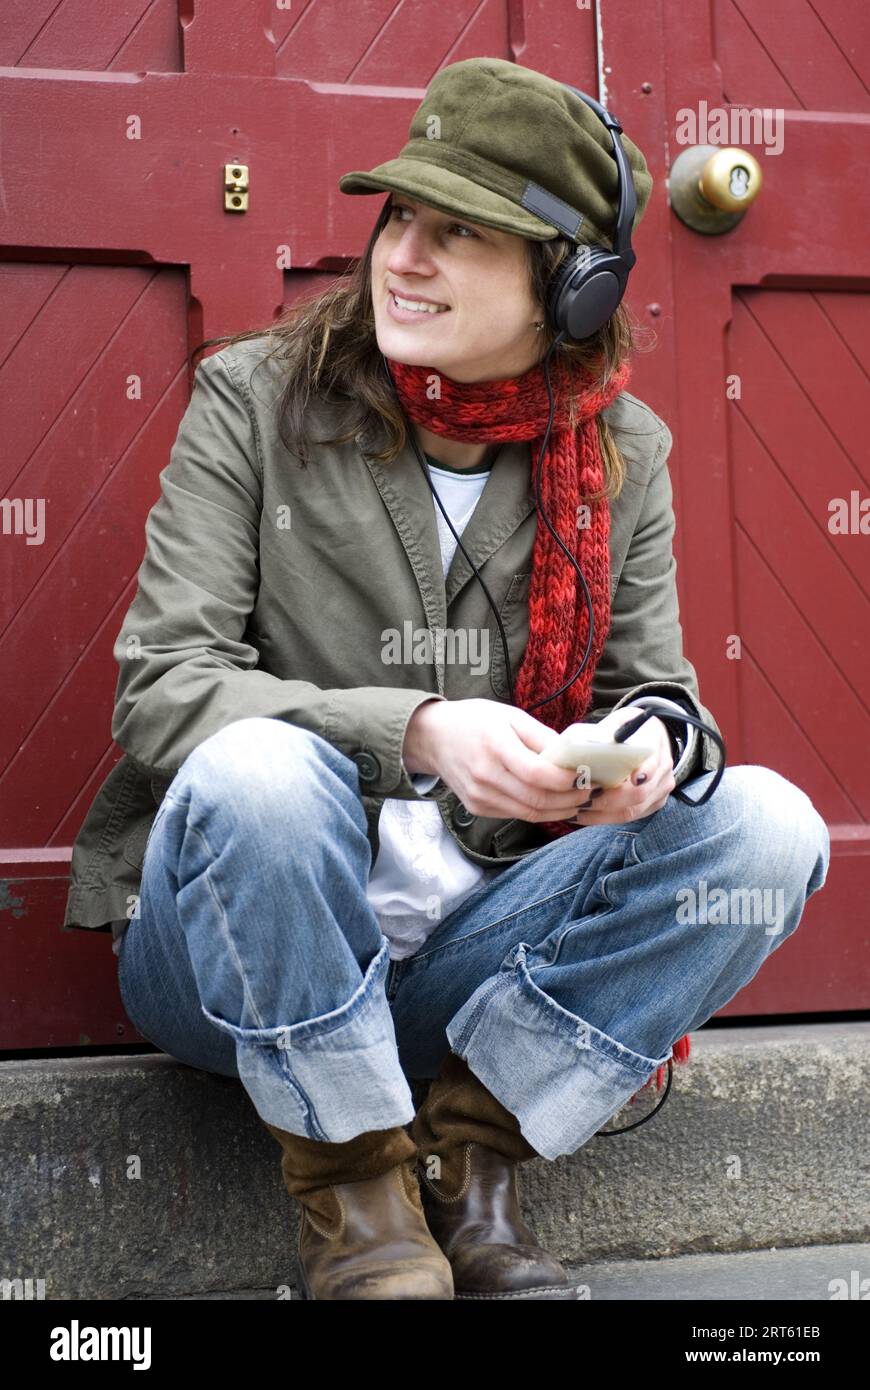 Hip woman relaxes infront of red door while listening to music on Ipod. Boston, MA. Stock Photo